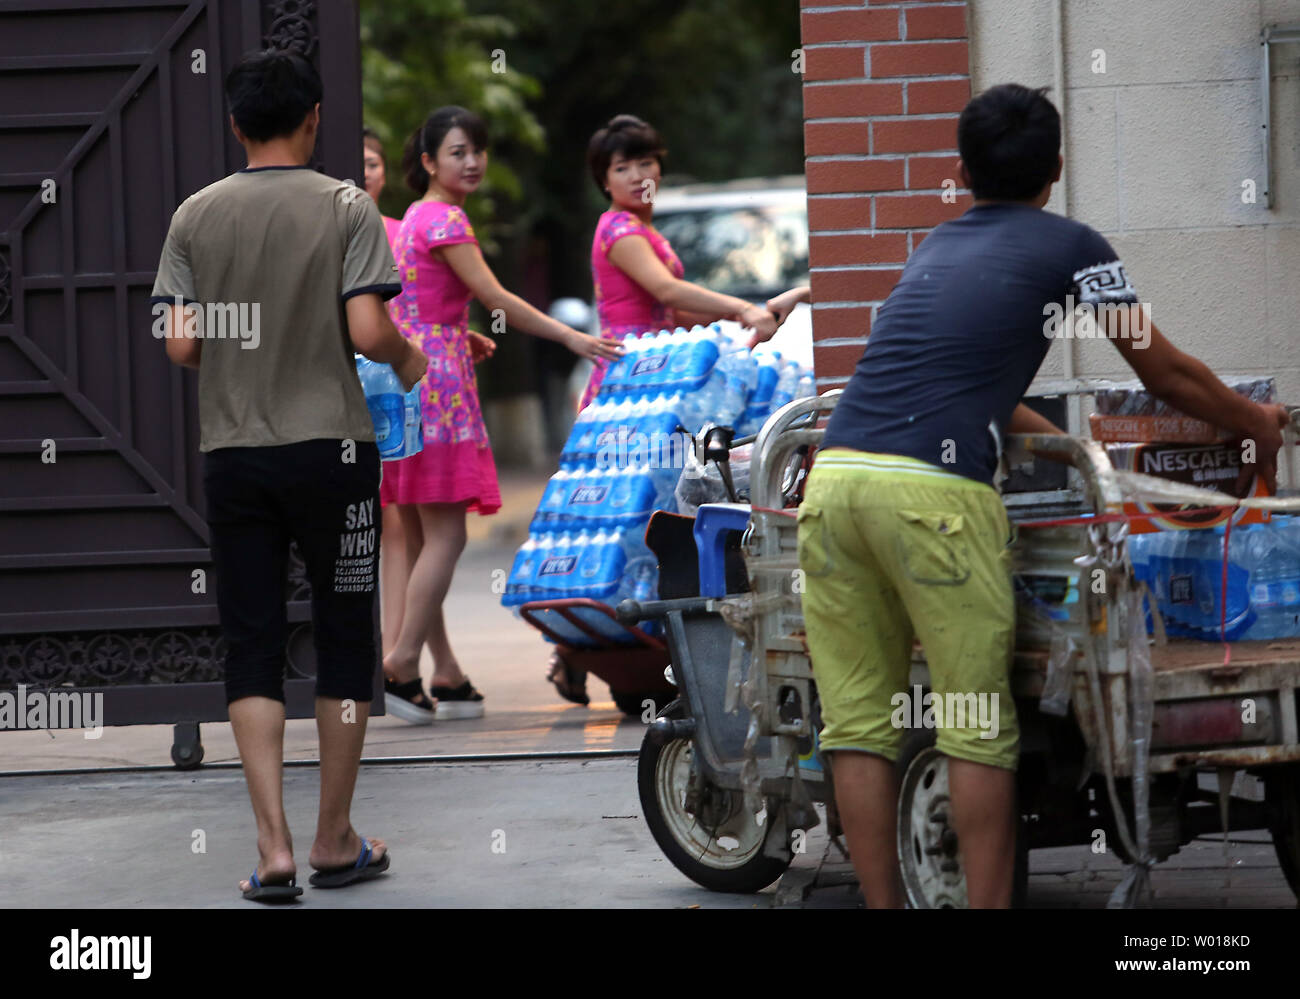 North Korean women pickup a delivery of beverages from Chinese men at their embassy in Beijing on August 26, 2015.  Despite China being North Korea's lifeline regarding energy, food and international diplomacy, North Korean leader Kim Jong Un declined an invitation to a attend a military parade commemorating China's victory over Japan during World War II.  The snub was announced amid escalating military tensions between North and South Korea.    Photo by Stephen Shaver/UPI Stock Photo